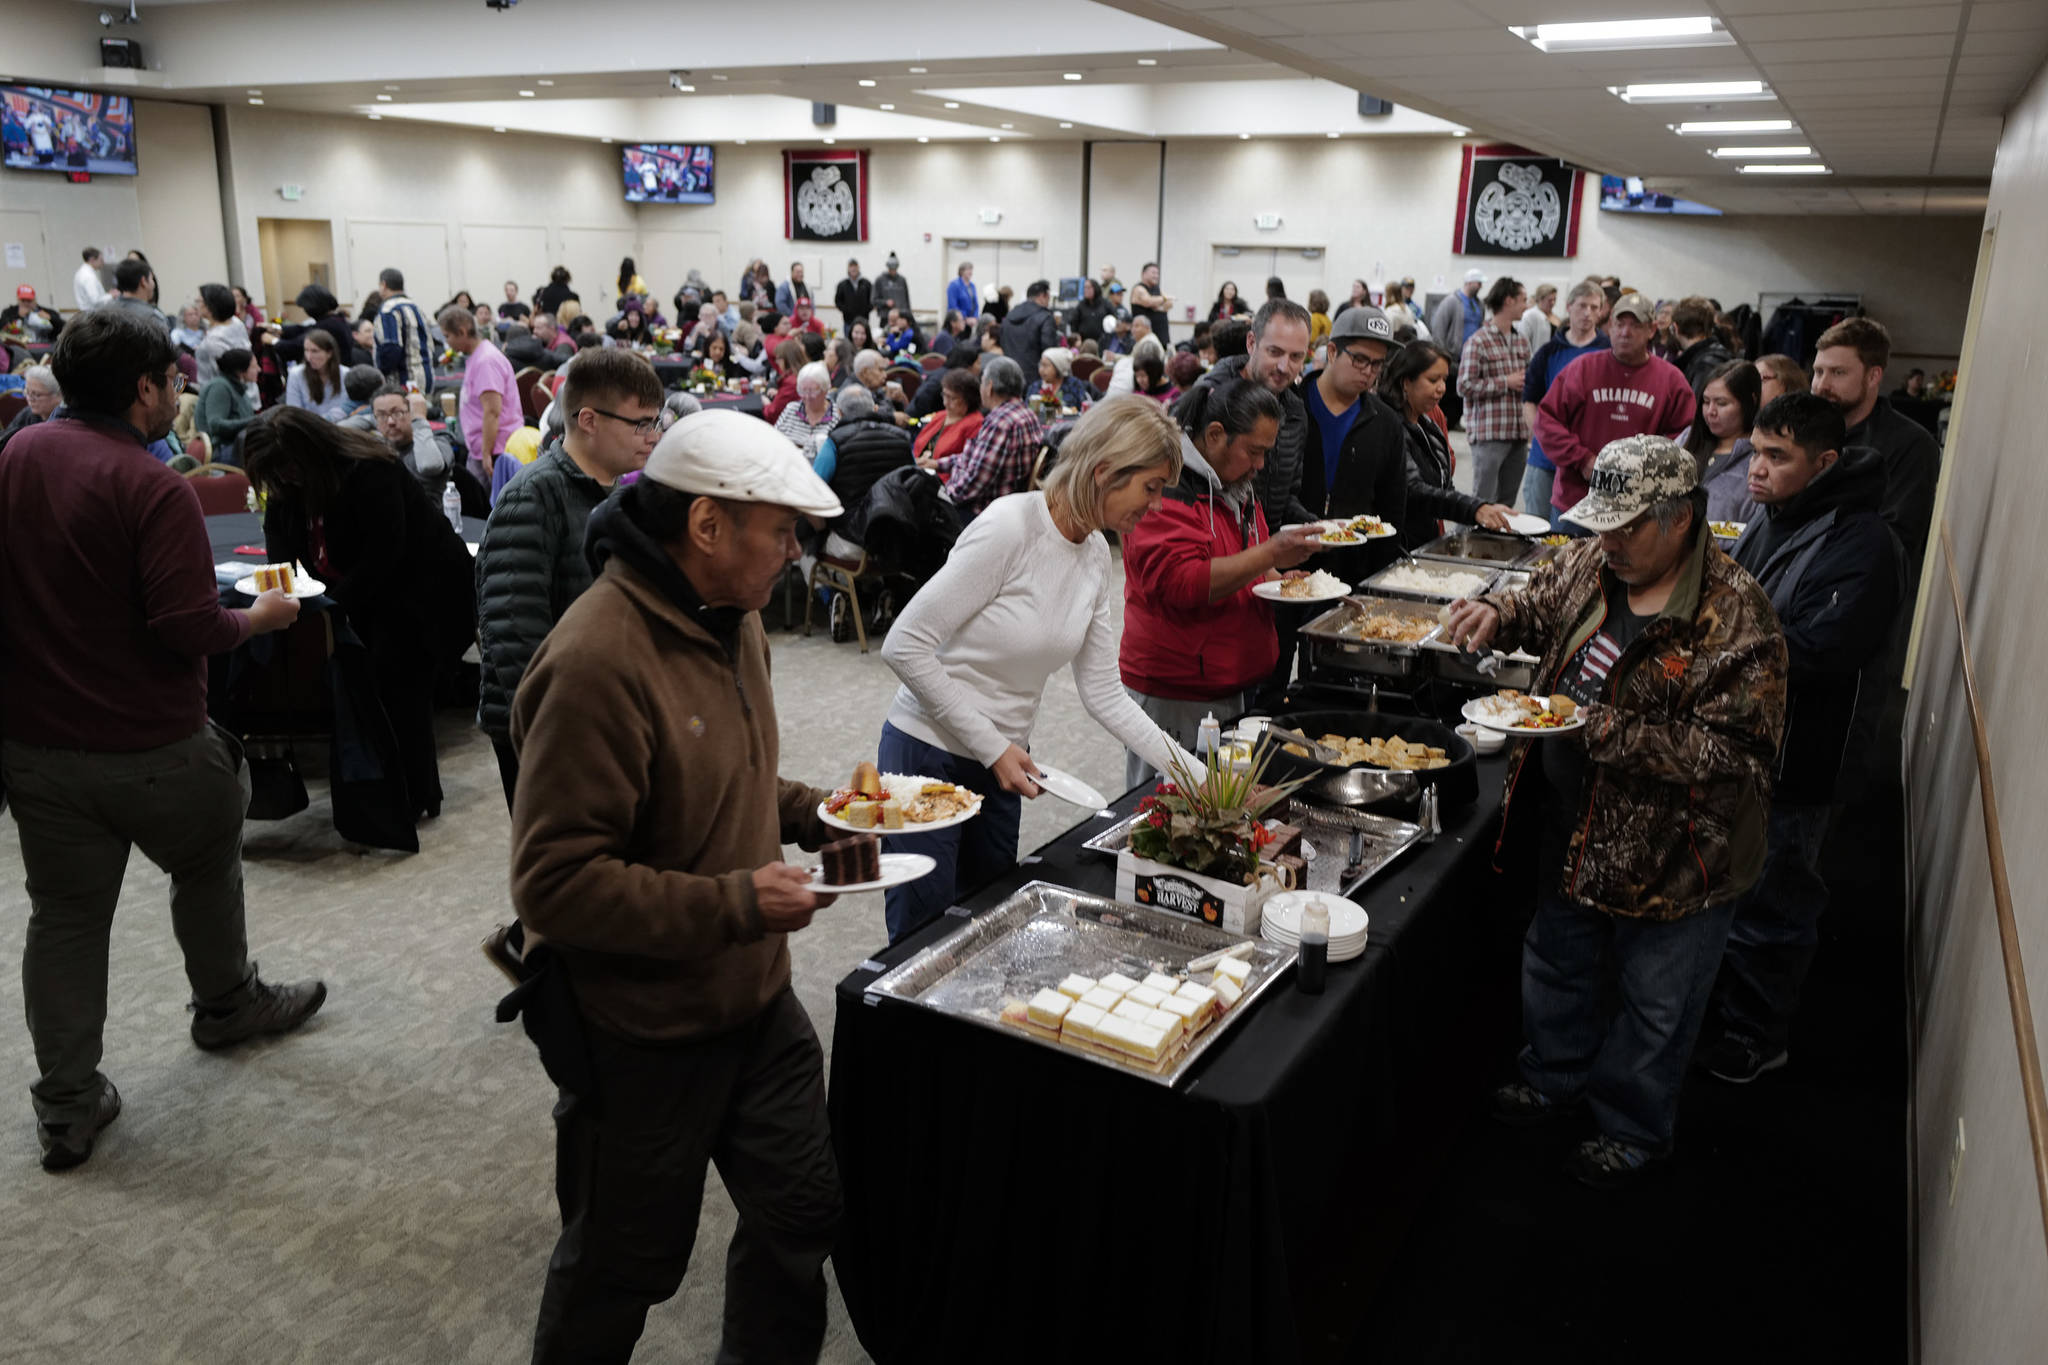 People crowd into the Elizabeth Peratrovich Hall for lunch during Indigenous Peoples’ Day on Monday, Oct. 14, 2019. (Michael Penn | Juneau Empire)